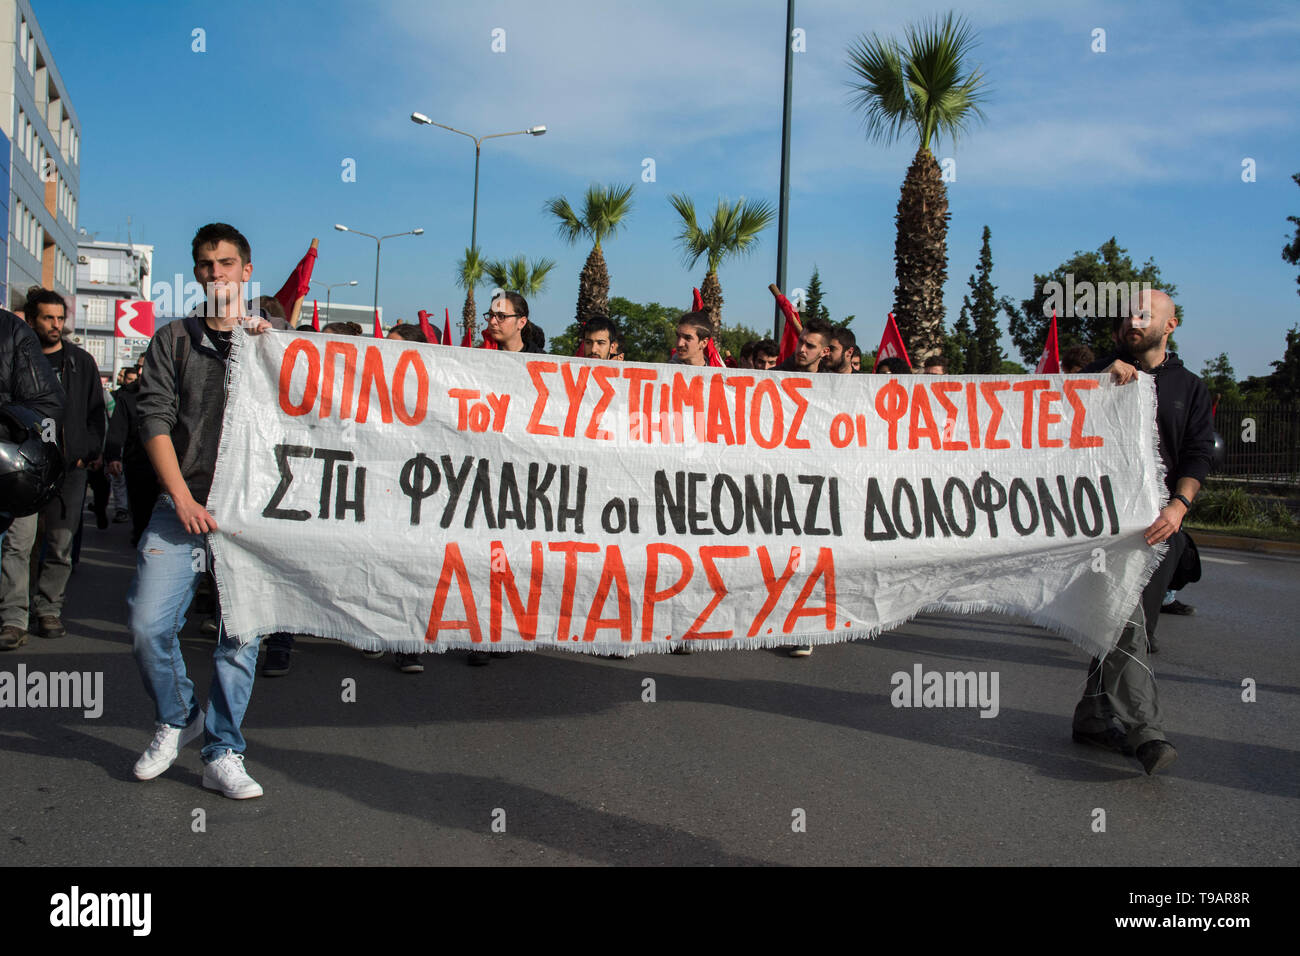 Athens, Greece. 17th May, 2019. Leftists and antifascists shout slogans against fascism and Golden Dawn, the Greek neo-nazi party. A demonstration was staged at Kolonos area, central Athens, where I. Kassidiaris, Golden Dawn MP and candidate for Athens Mayor in the upcoming municipal elections, was to address party supporters. Credit: Nikolas Georgiou/Alamy Live News Stock Photo